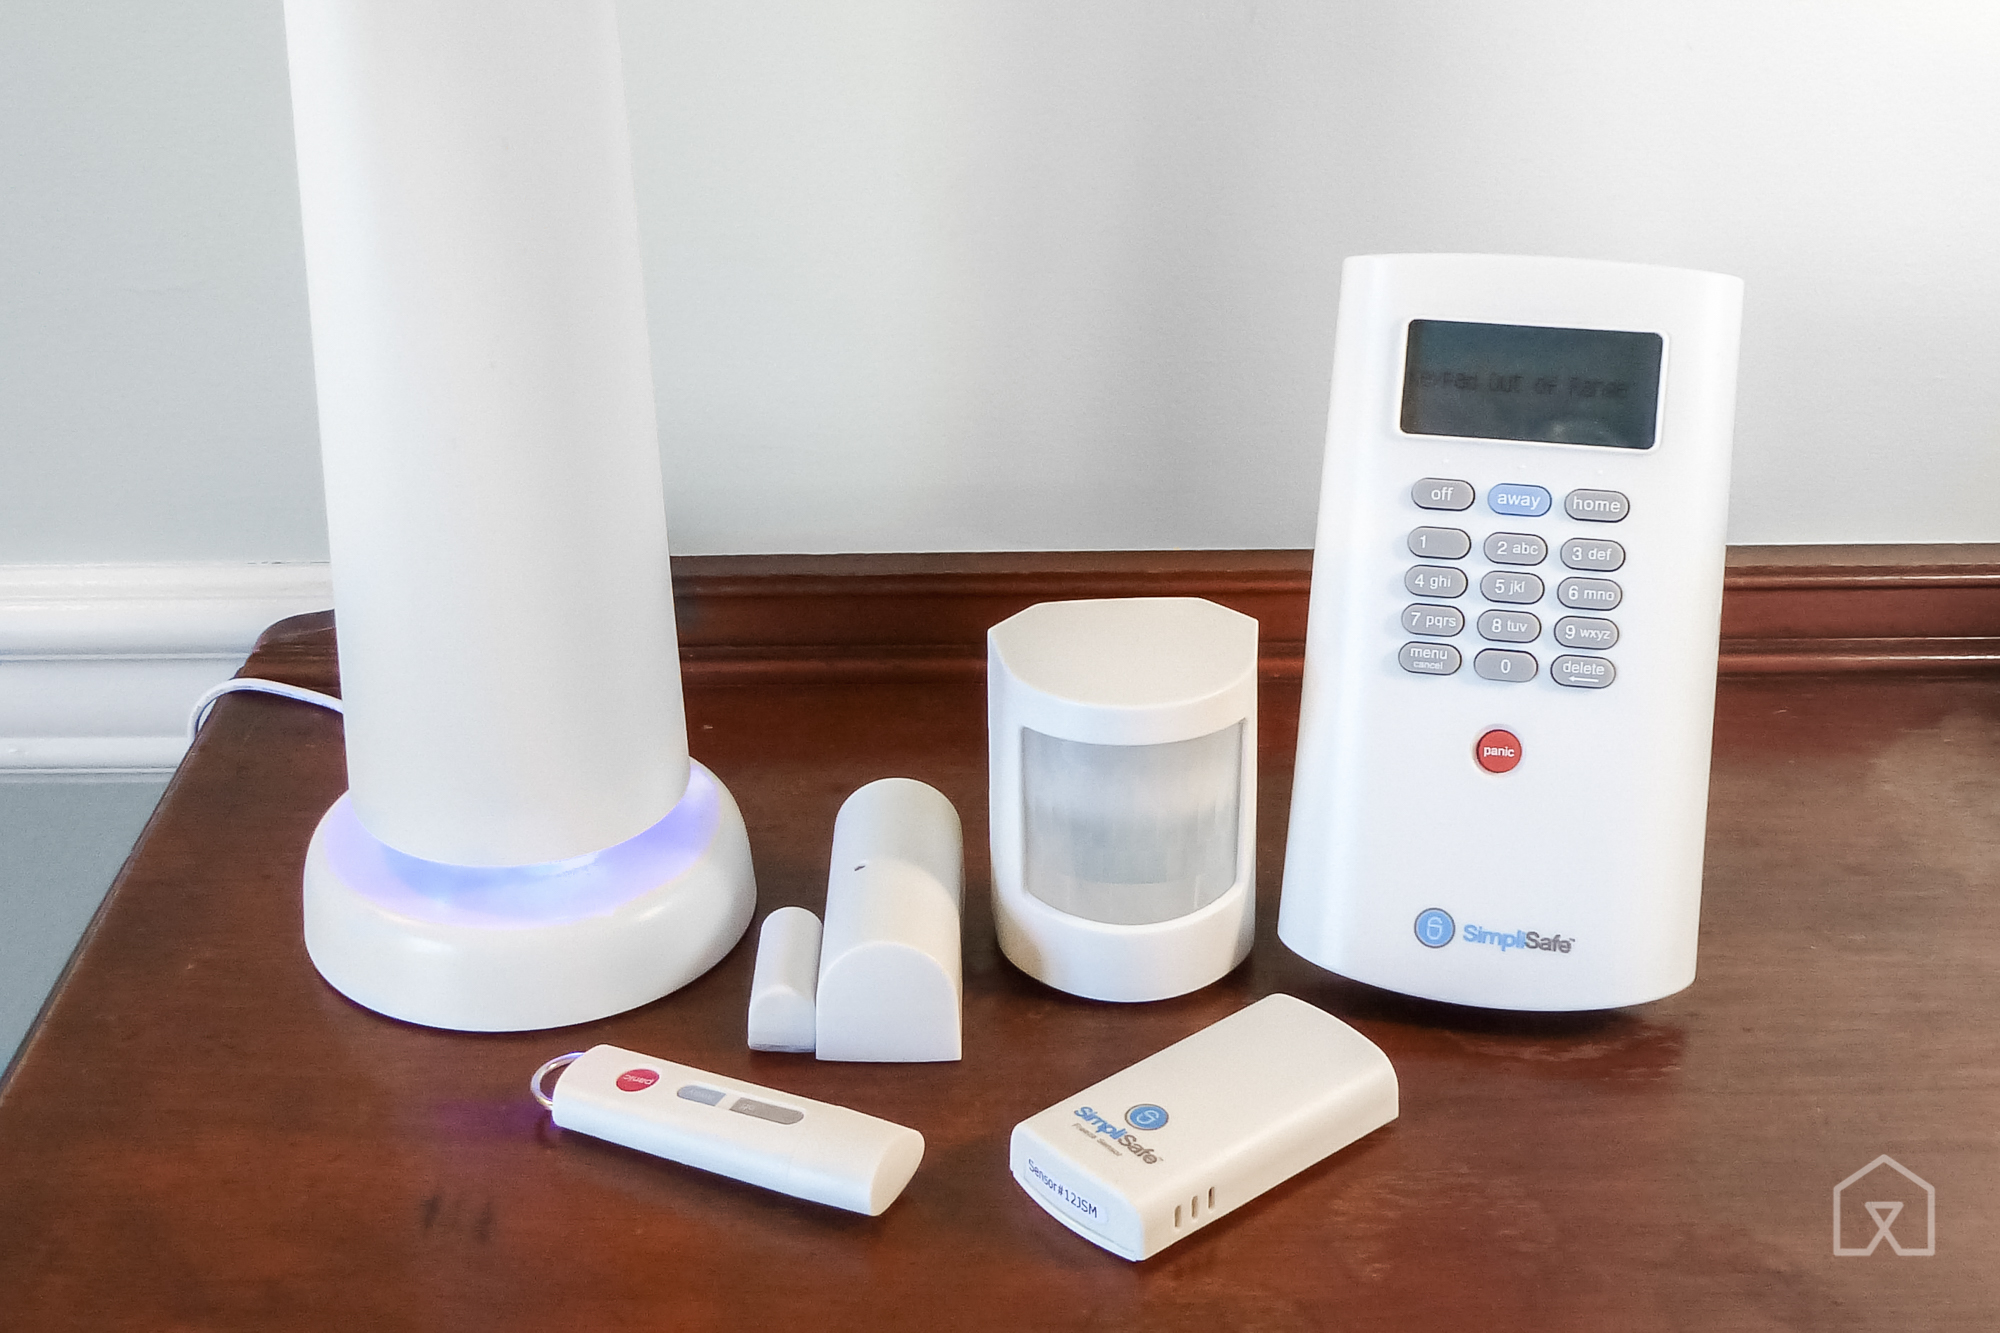 The best home security system